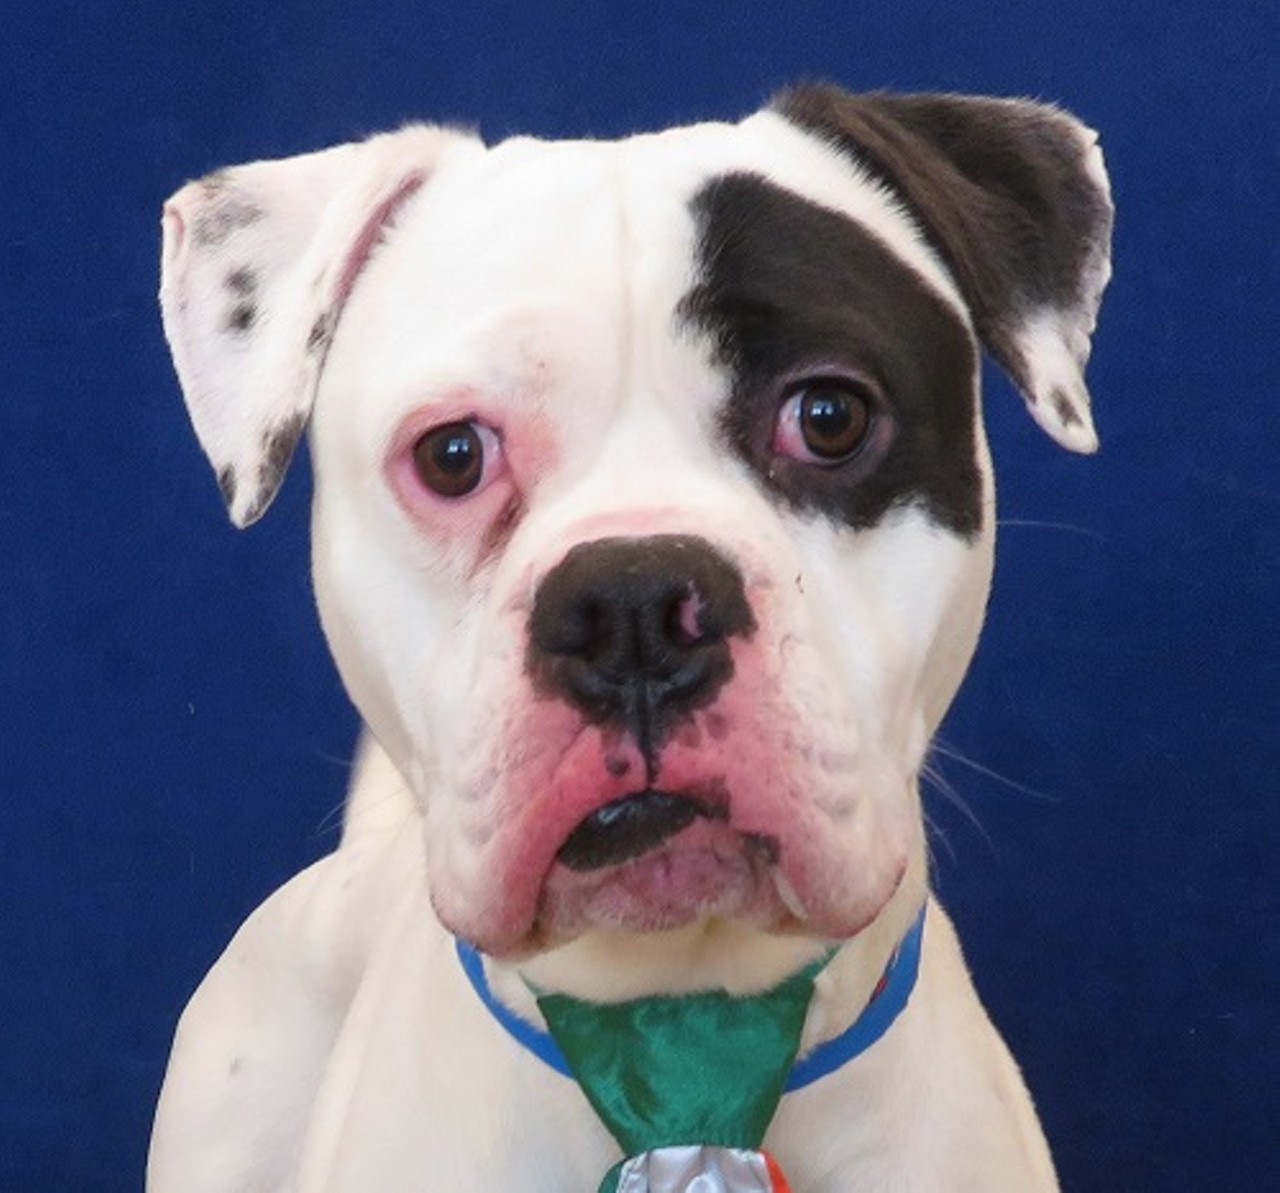 NAME: Jinn
GENDER: Male
BREED: American Bulldog
AGE: 2 years
WEIGHT: 56 pounds
SPECIAL CONSIDERATIONS: Prefers large dogs over small dogs
REASON I CAME TO MHS: Owner surrender
LOCATION: Petco of Sterling Heights
ID NUMBER: 864881